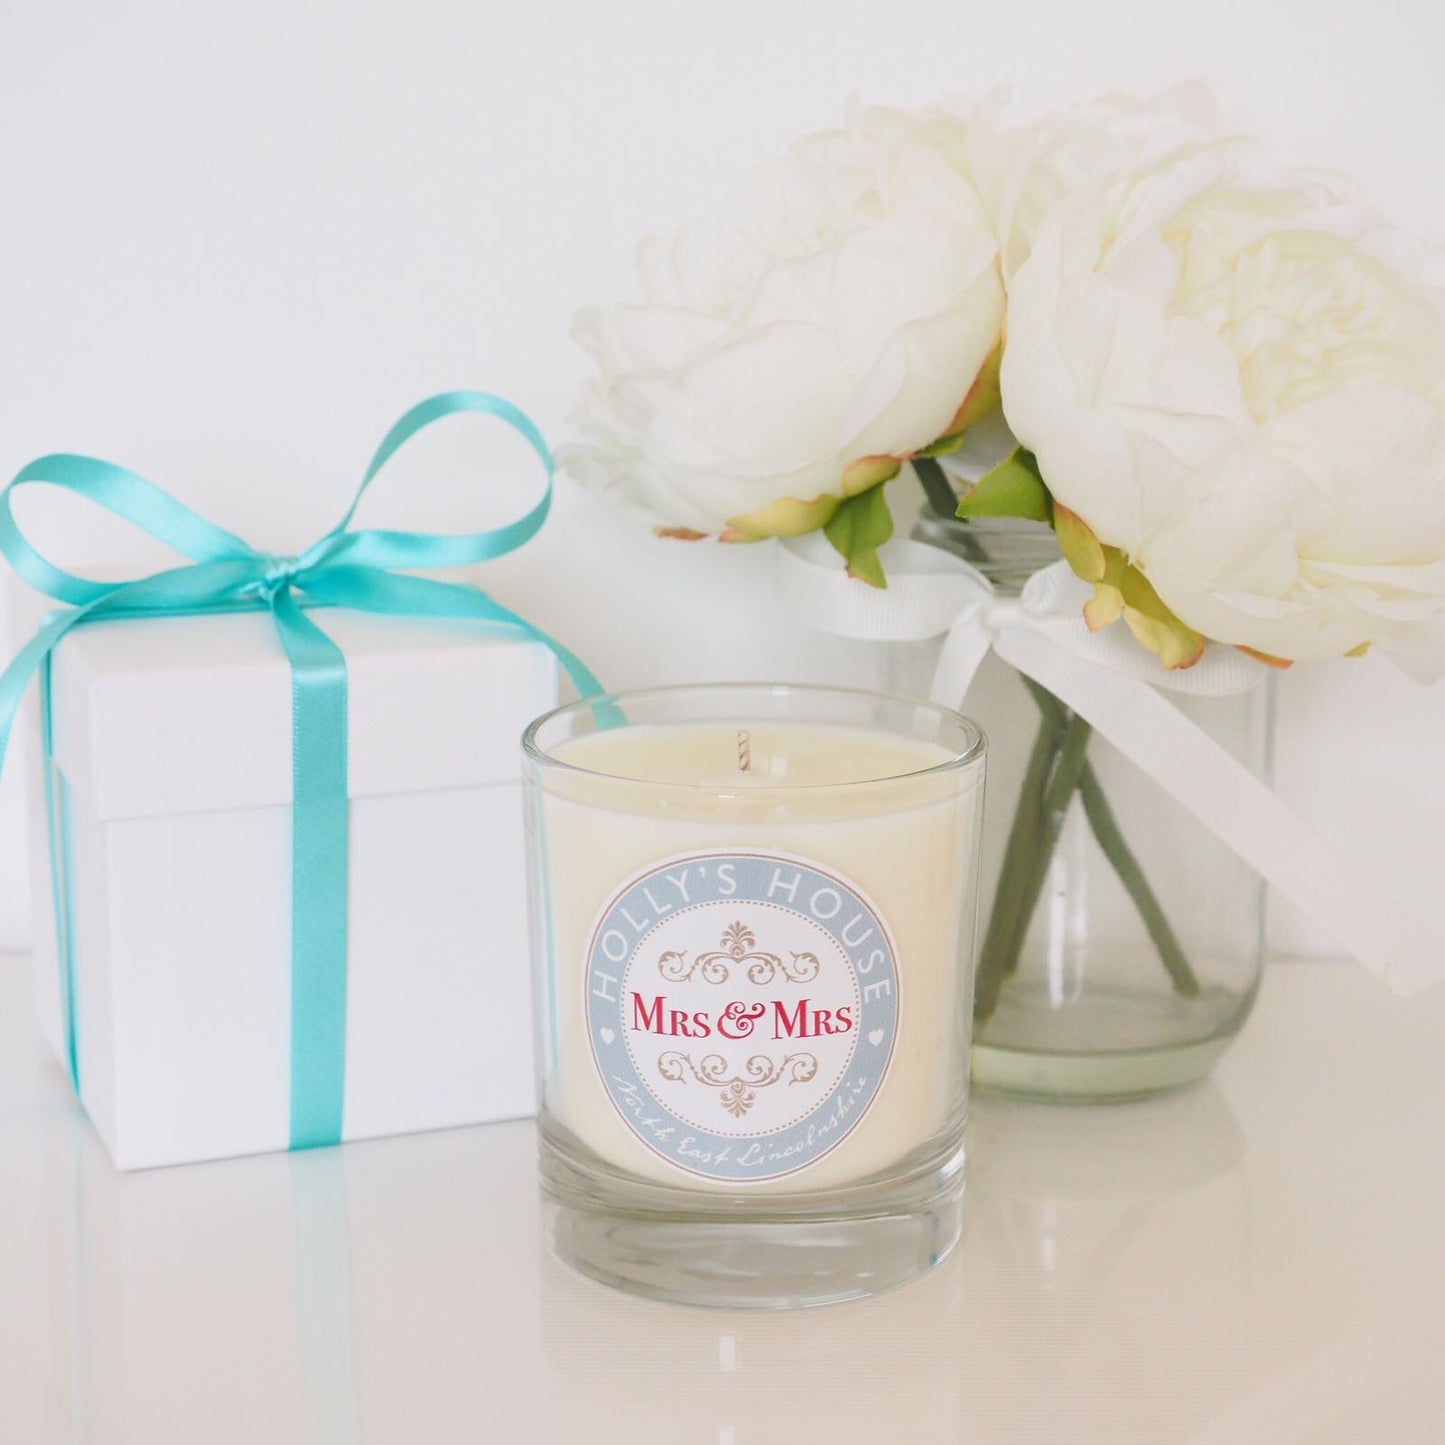 Strudel & Spice Luxury Scented Candle